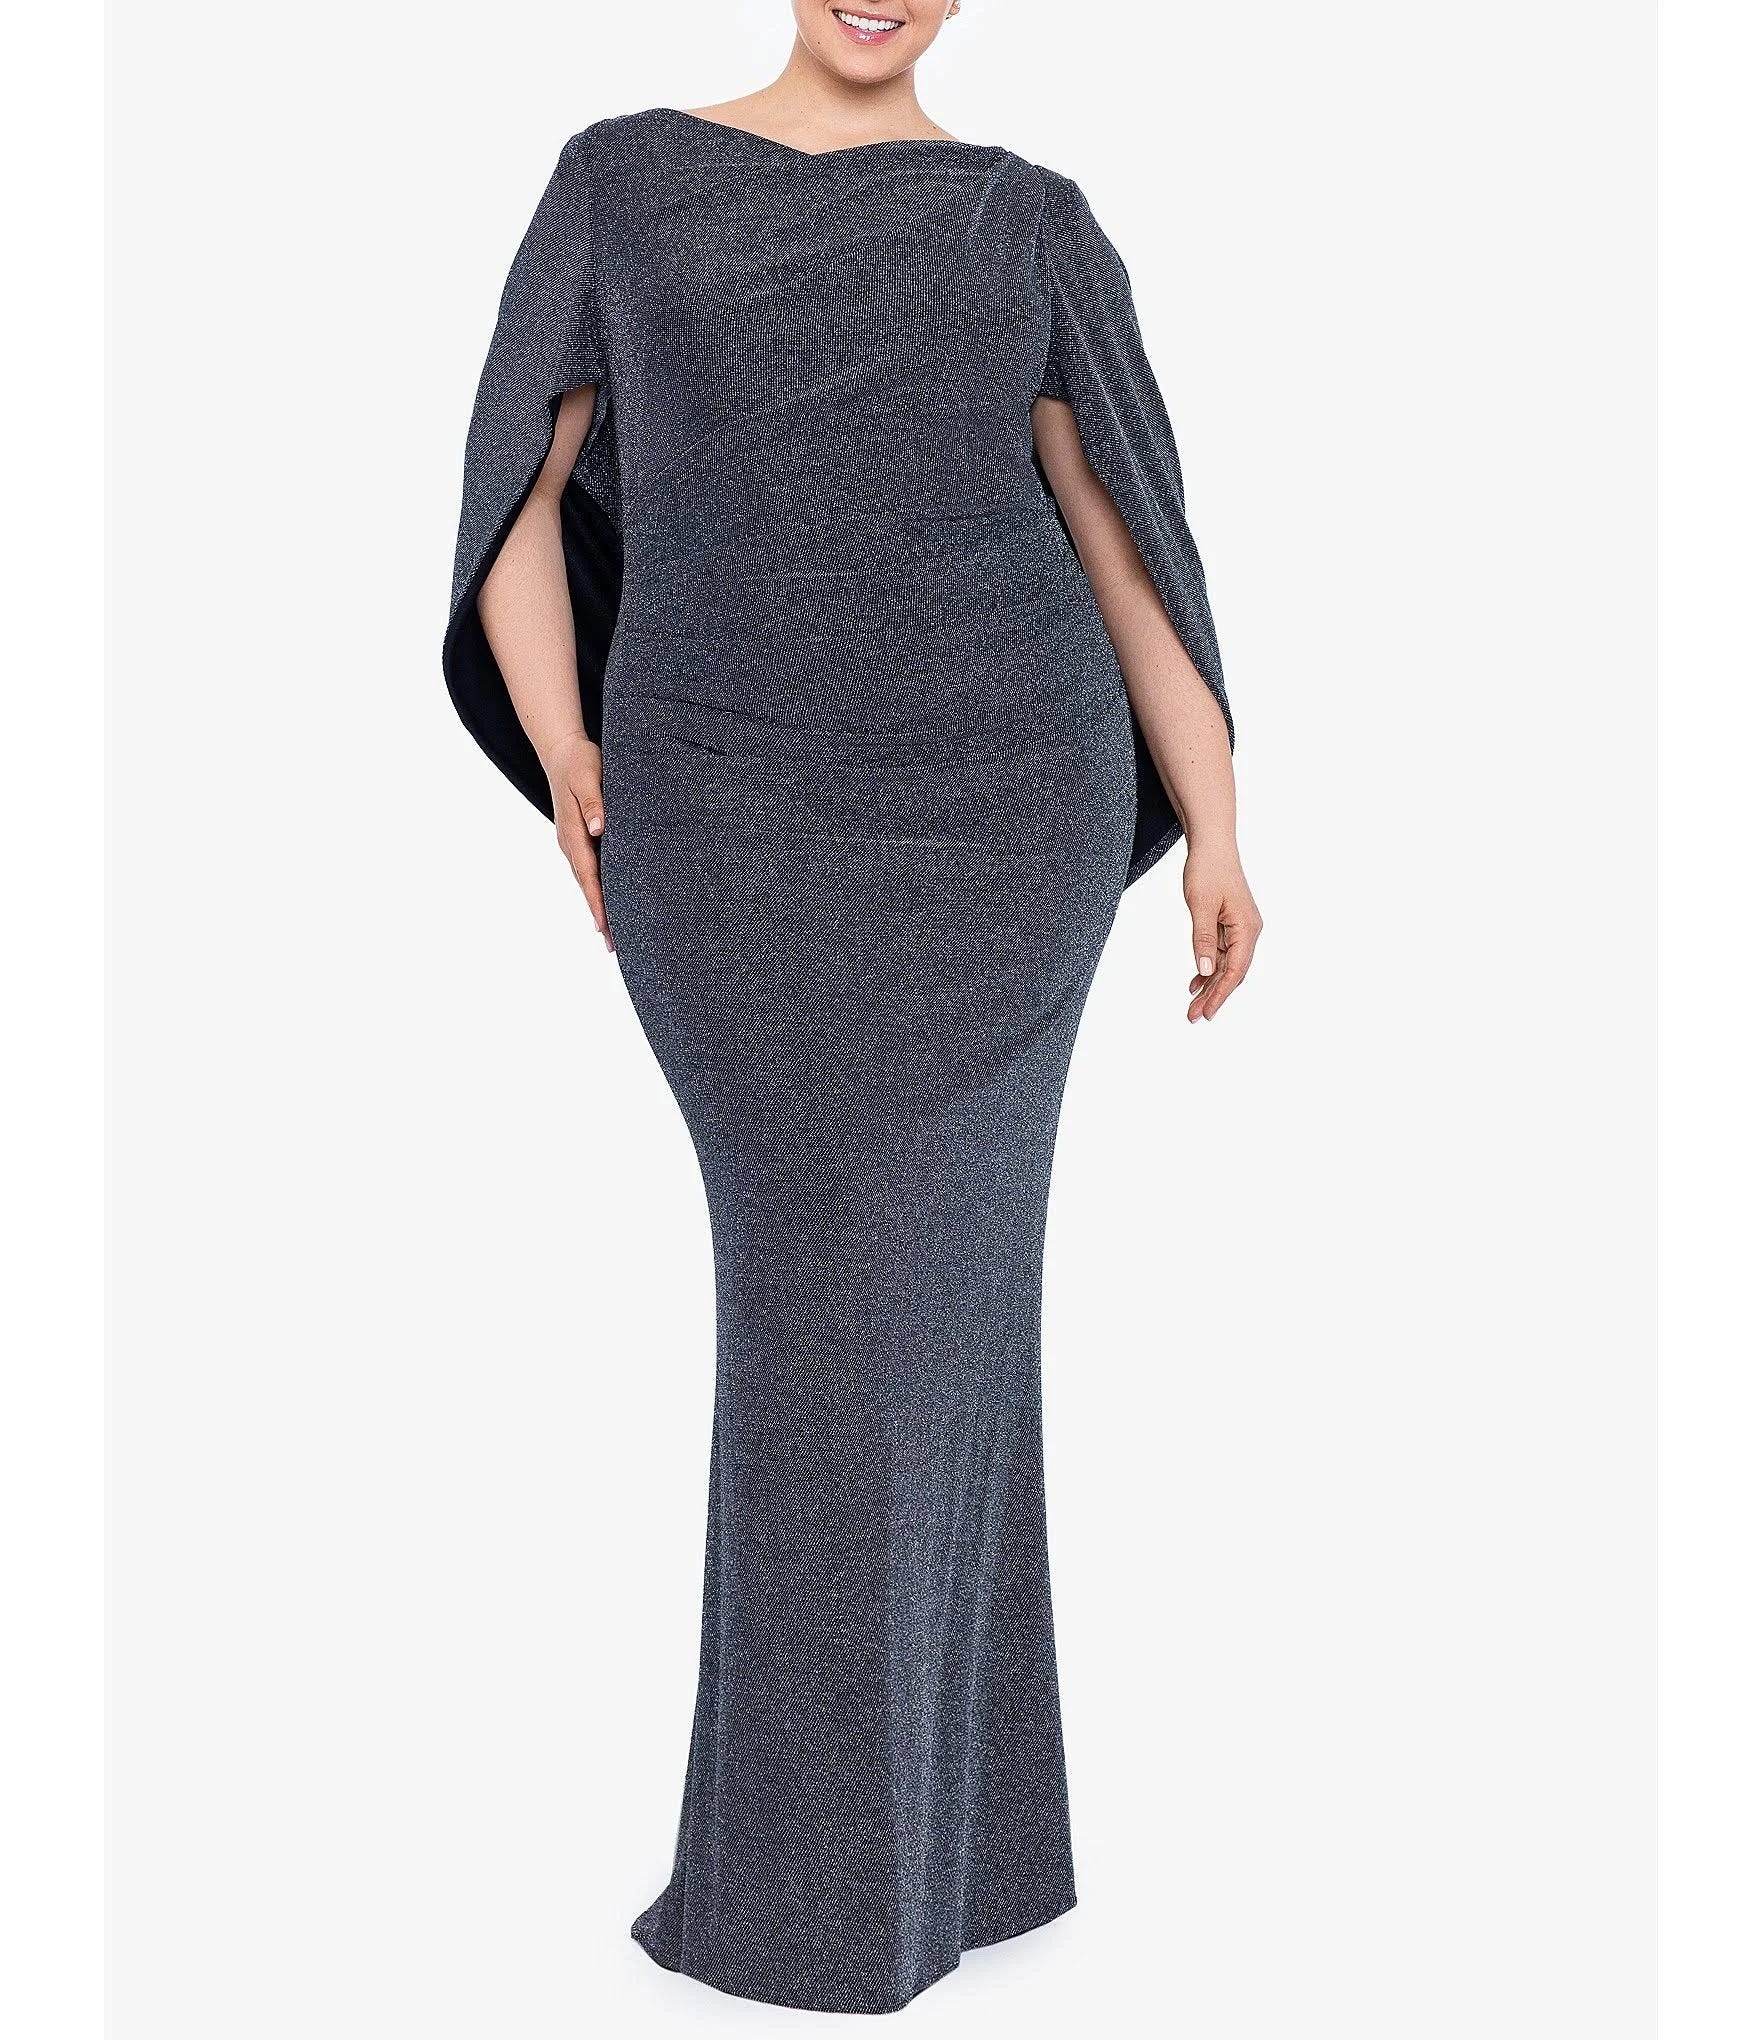 Shimmering Metallic Plus Size Gown with Capelet | Image